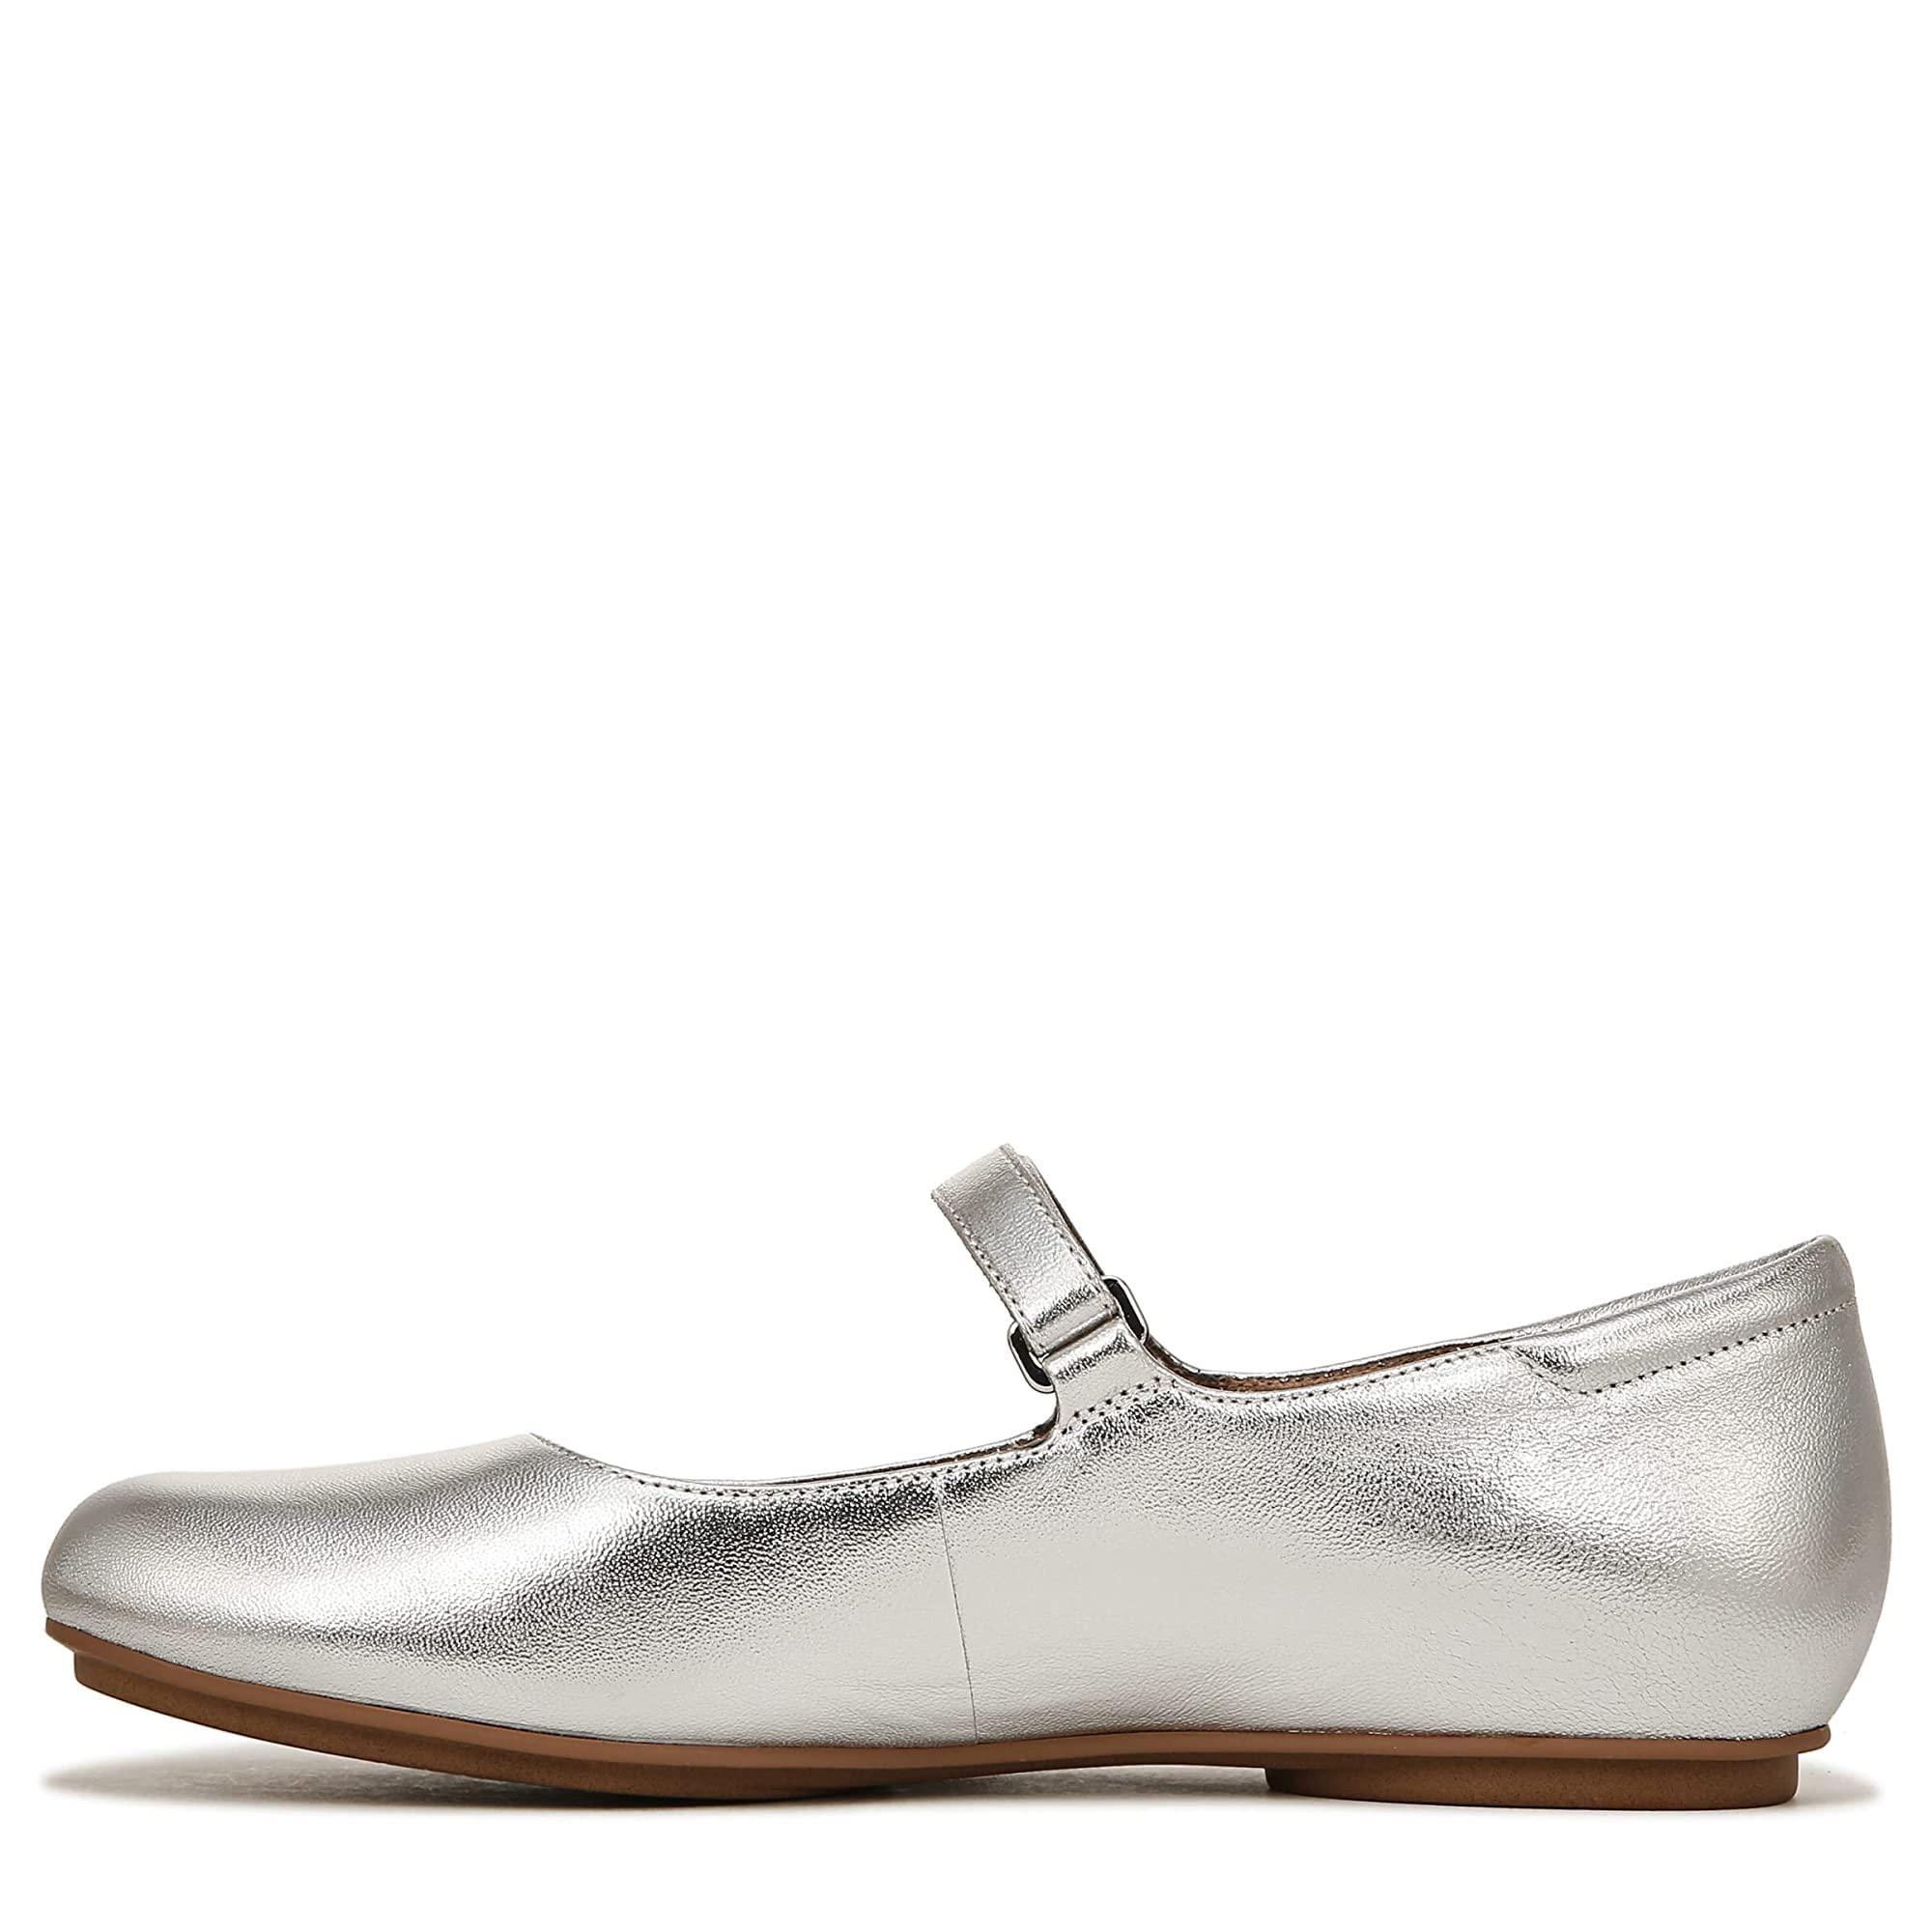 Naturalizer Maxwell-mj Mary Jane Round Toe Ballet Flats in White | Lyst